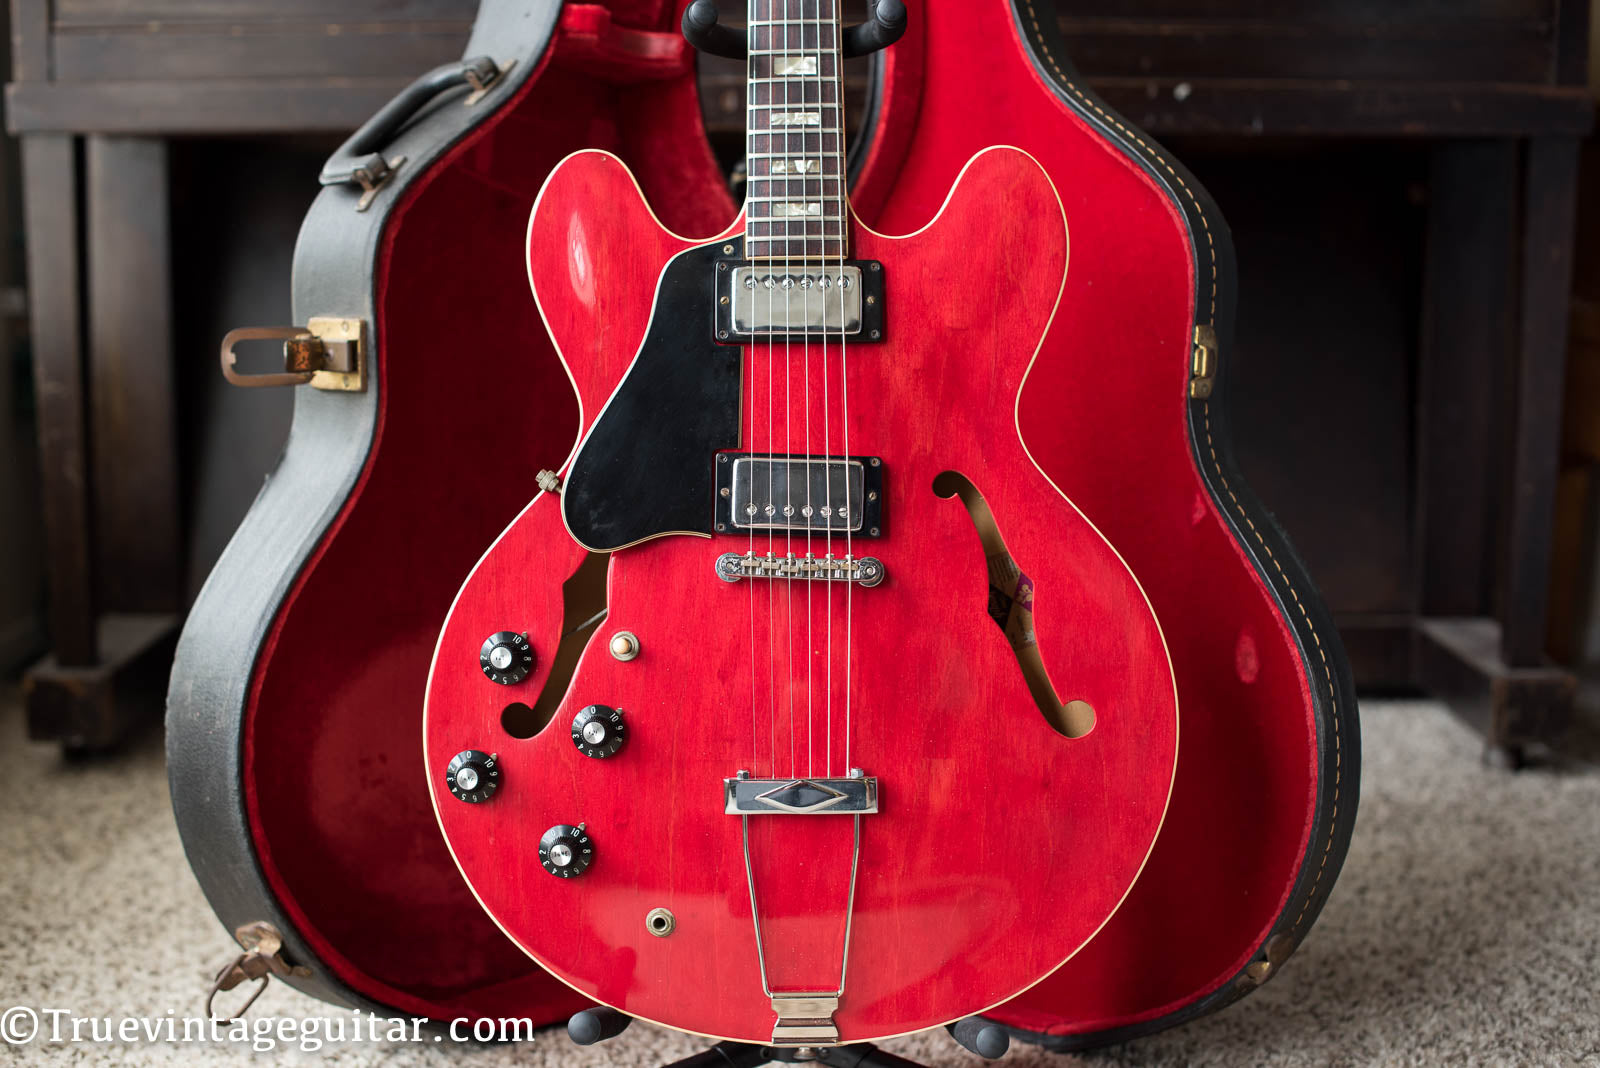 lefty Gibson ES-335 Cherry Red vintage 1973 guitar